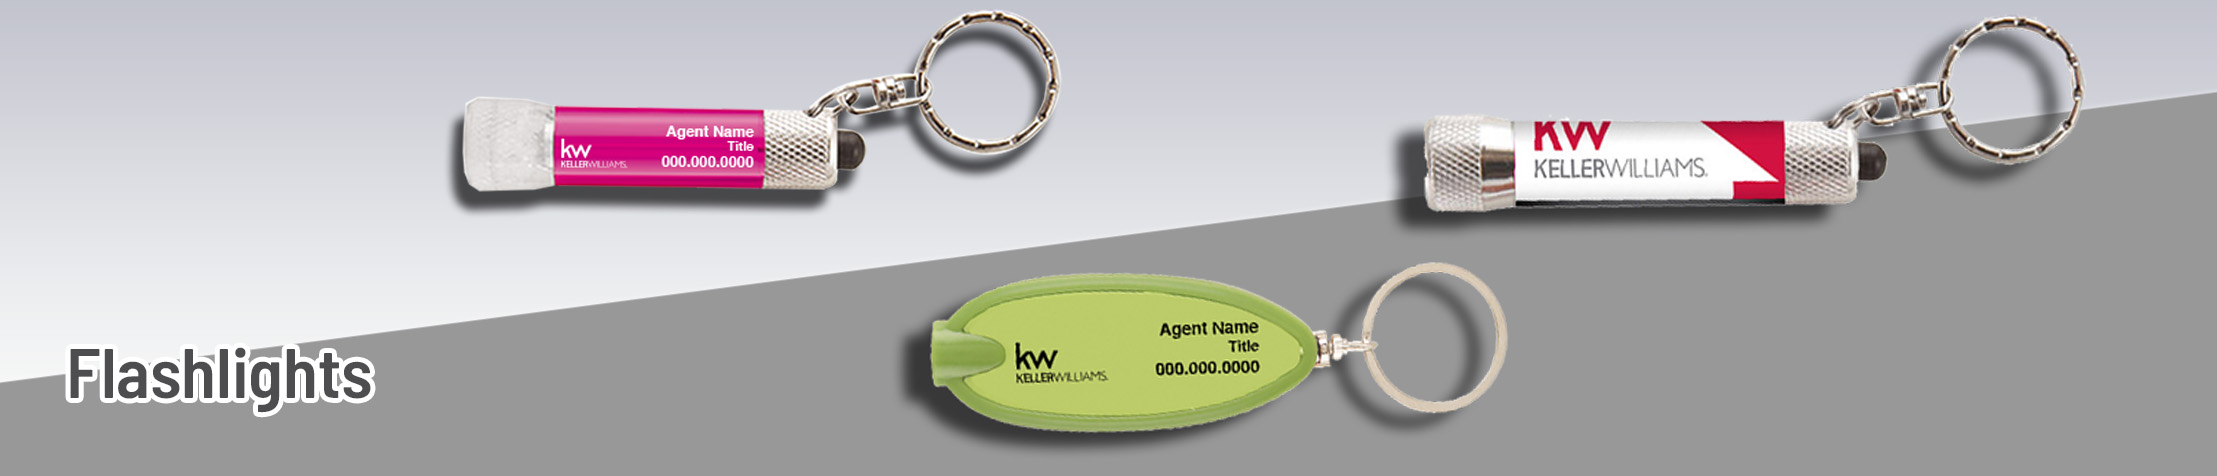 Keller Williams Real Estate Flashlights - KW personalized realtor promotional products | Sparkprint.com